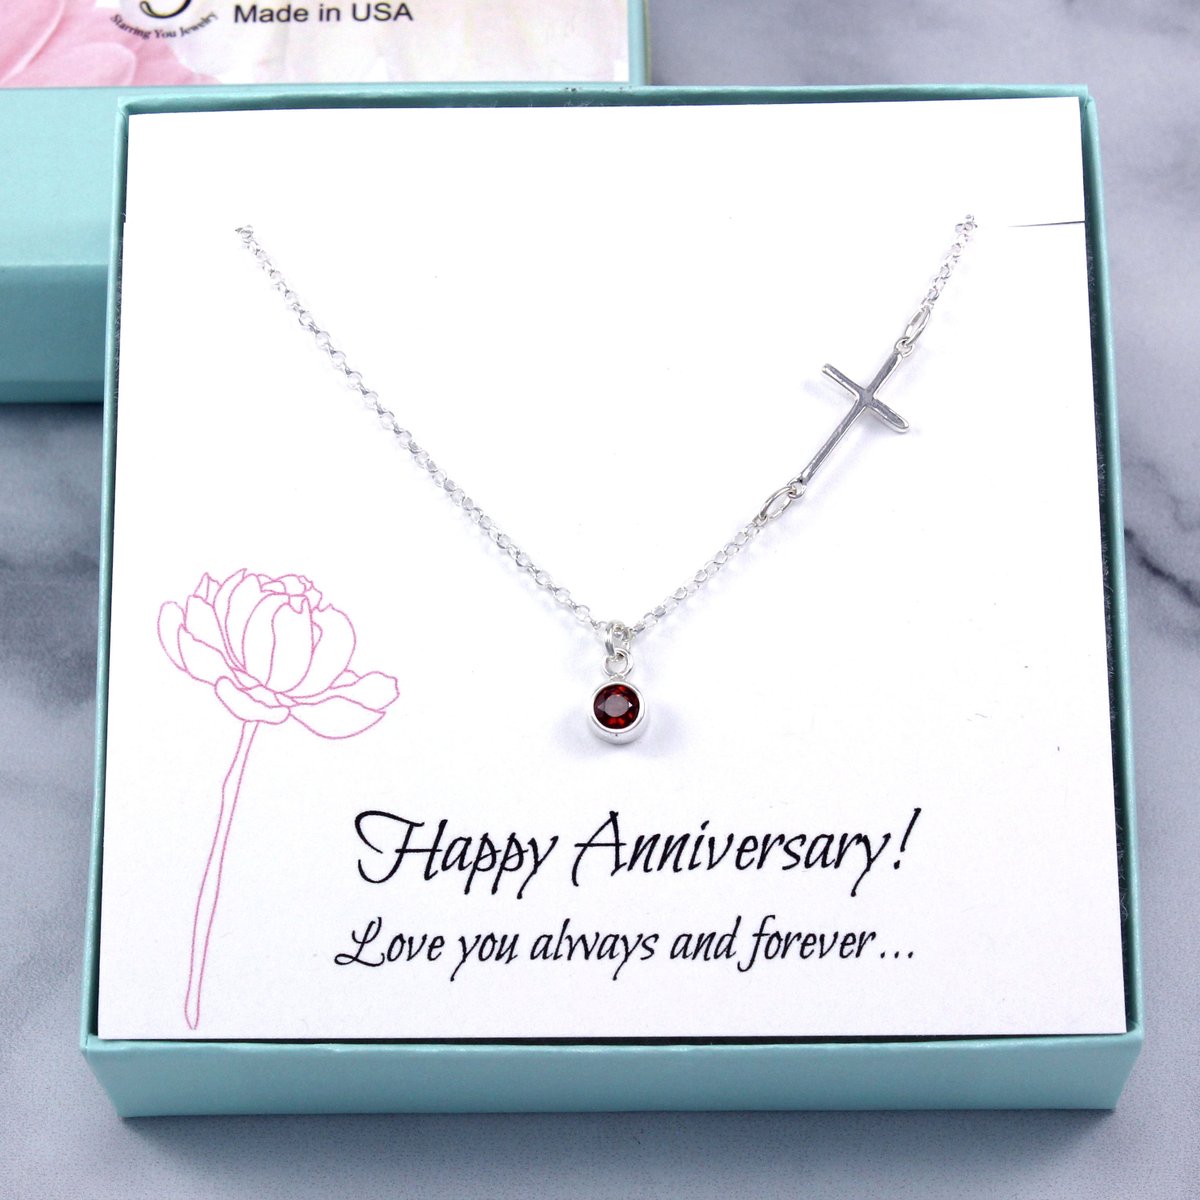 Anniversary Gift: Dainty personalized birthstone necklace with small sideways cross pendant in sterling silver for dating or wedding date tuppu.net/adee5507 #etsyshop #handmadejewelry #etsyfinds #Etsy #etsyjewelry #giftideas #etsygifts #shopsmall